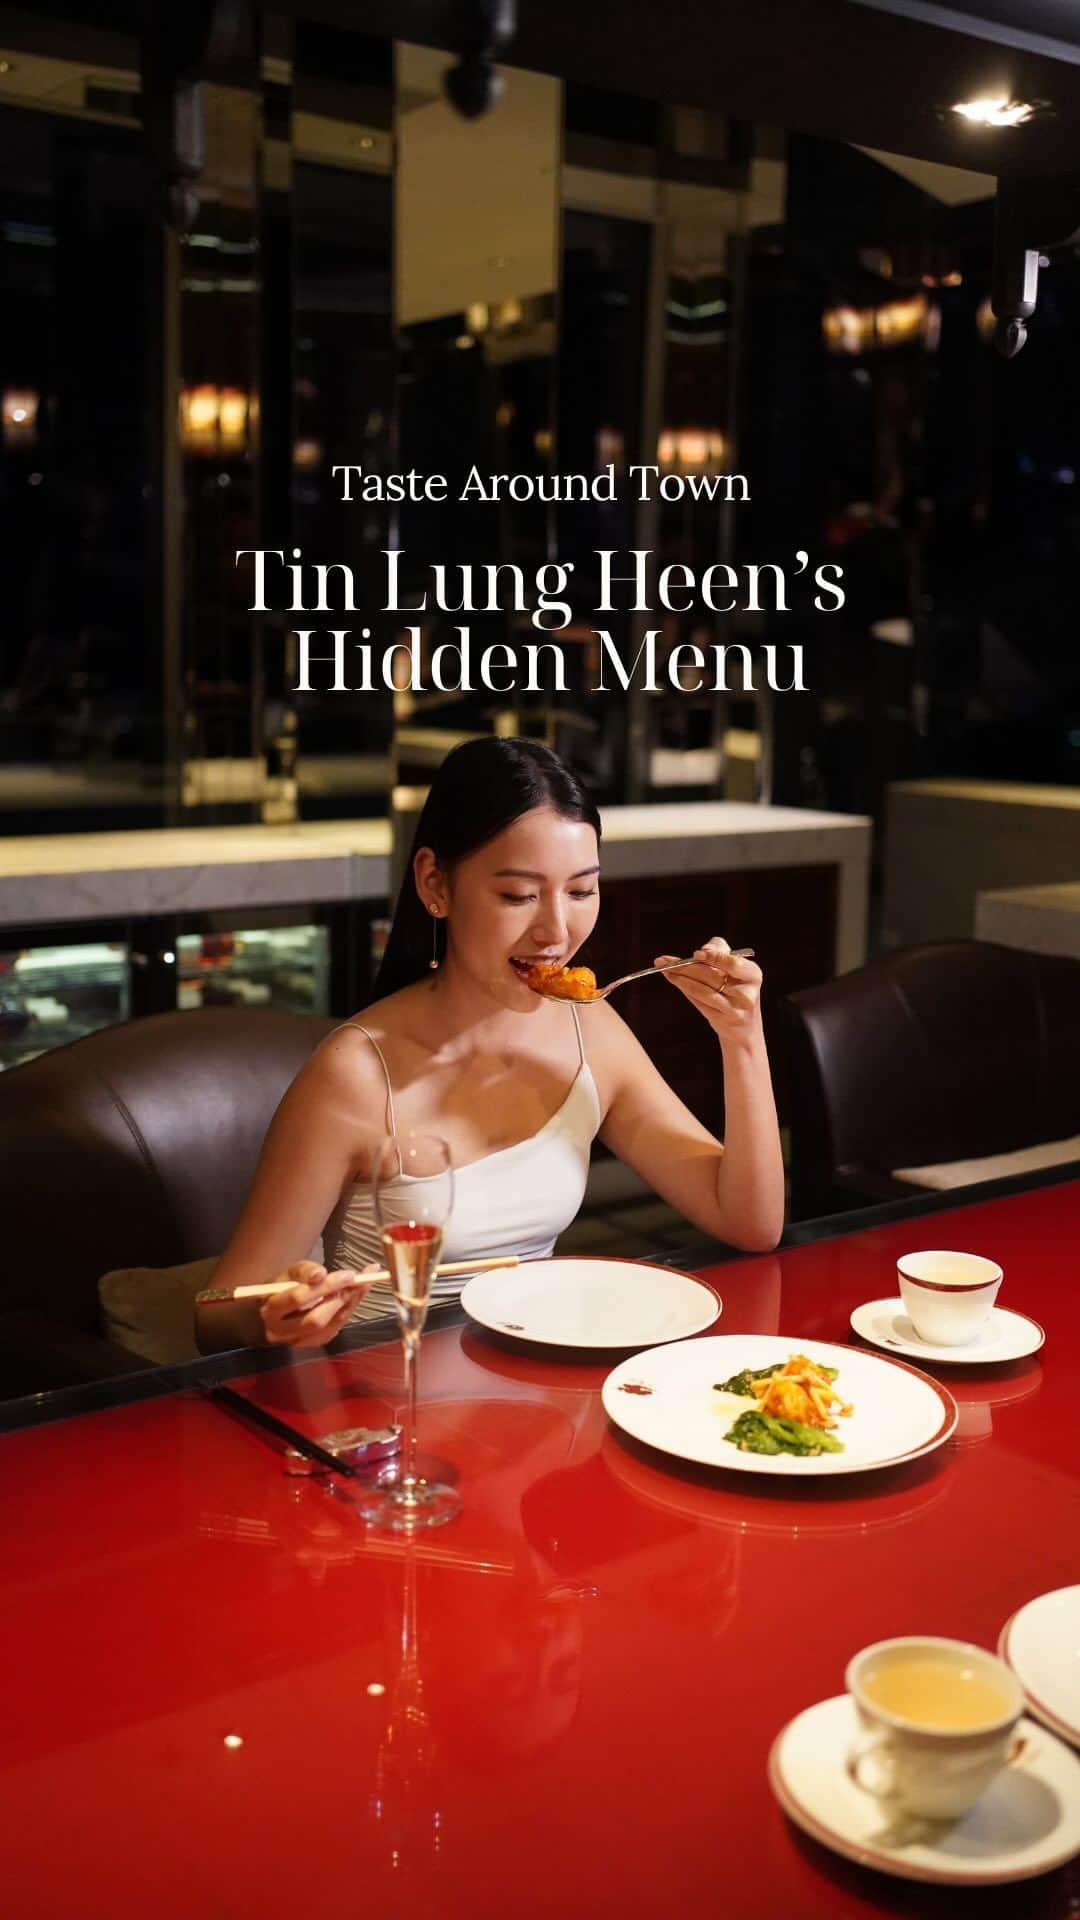 Discover Hong Kongのインスタグラム：「[Taste around town｜Tin Lung Heen’s celebrity chef presents must-try Chinese dishes of the month 🥘] 🍷Taste Around Town is happening this month! Experience the “Hidden Menu 3.0” showcasing new interpretations of local dishes by 24 celebrity chefs from renowned local restaurants. Our top pick this time is Tin Lung Heen, which has been awarded two Michelin stars every year for 11 years in a row! Chef Paul Lau presents the Tin Lung Heen Sustainable Menu, an eight-course omakase feast featuring tempting delicacies made from sustainable fresh ingredients. Book your table in November before it’s too late! For details, visit https://bit.ly/3QP2eTC   【品味全城｜天龍軒名廚發辦 炮製可持續中式料理🥘】 🍷美酒佳餚巡禮嘅下半場 —「品味全城」喺11月接力登場！追求頂尖中菜滋味嘅你一定要mark實「大師發辦3.0升級」，邀請咗24間高級食府名廚親自發辦，創作出與眾不同嘅新派中菜！  今次推介嘅係連續第11年摘獲「米芝蓮二星」榮譽嘅天龍軒🌟，由經驗豐富嘅主廚劉秉雷師傅設計嘅「天龍譽宴」Omakase菜單，揀選高級、低污染食材，炮製8道色香味俱全嘅限定菜式，包你食到大滿足！   P.S.「大師發辦」菜單限量供應，記住要預先訂座，詳情即上https://bit.ly/462mFk9了解！  📍: @ritzcarltonhongkong  #TasteAroundTown #WineAndDine2023 #DiscoverHongKong  #HelloHongKong  🥘😋🥘😋🥘😋🥘😋🥘😋🥘😋🥘😋🥘😋🥘😋 What else can you do at night in Hong Kong?🌃 Stay tuned for our #HongKongAfter6 !👀 想知嚟緊夜晚有乜玩？🌃記得跟貼我哋嘅 #HongKongAfter6 ，更多節日盛事、玩樂好去處等緊你！👀」